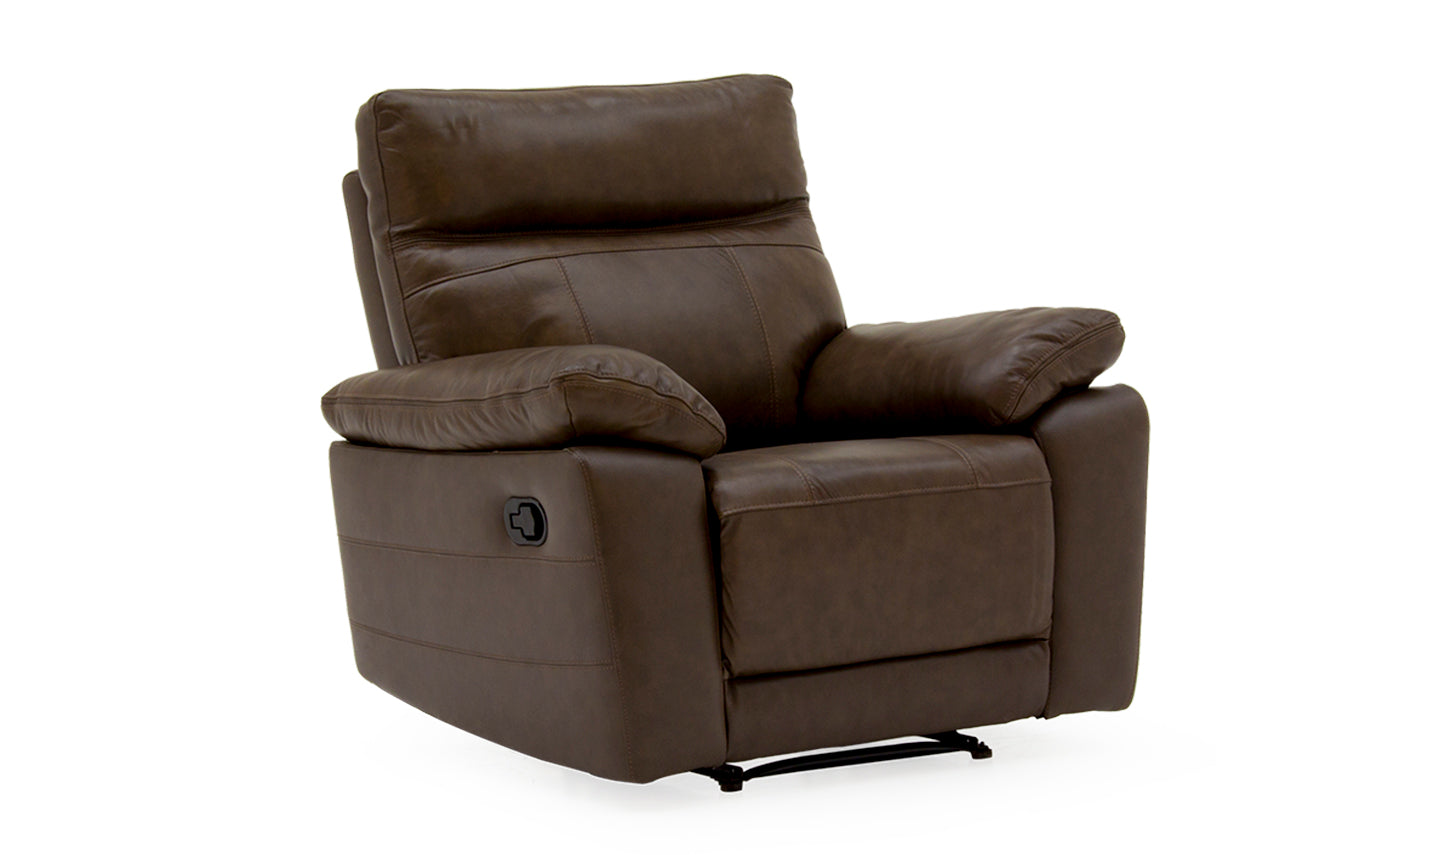 Positano Manual Leather Recliner Armchair